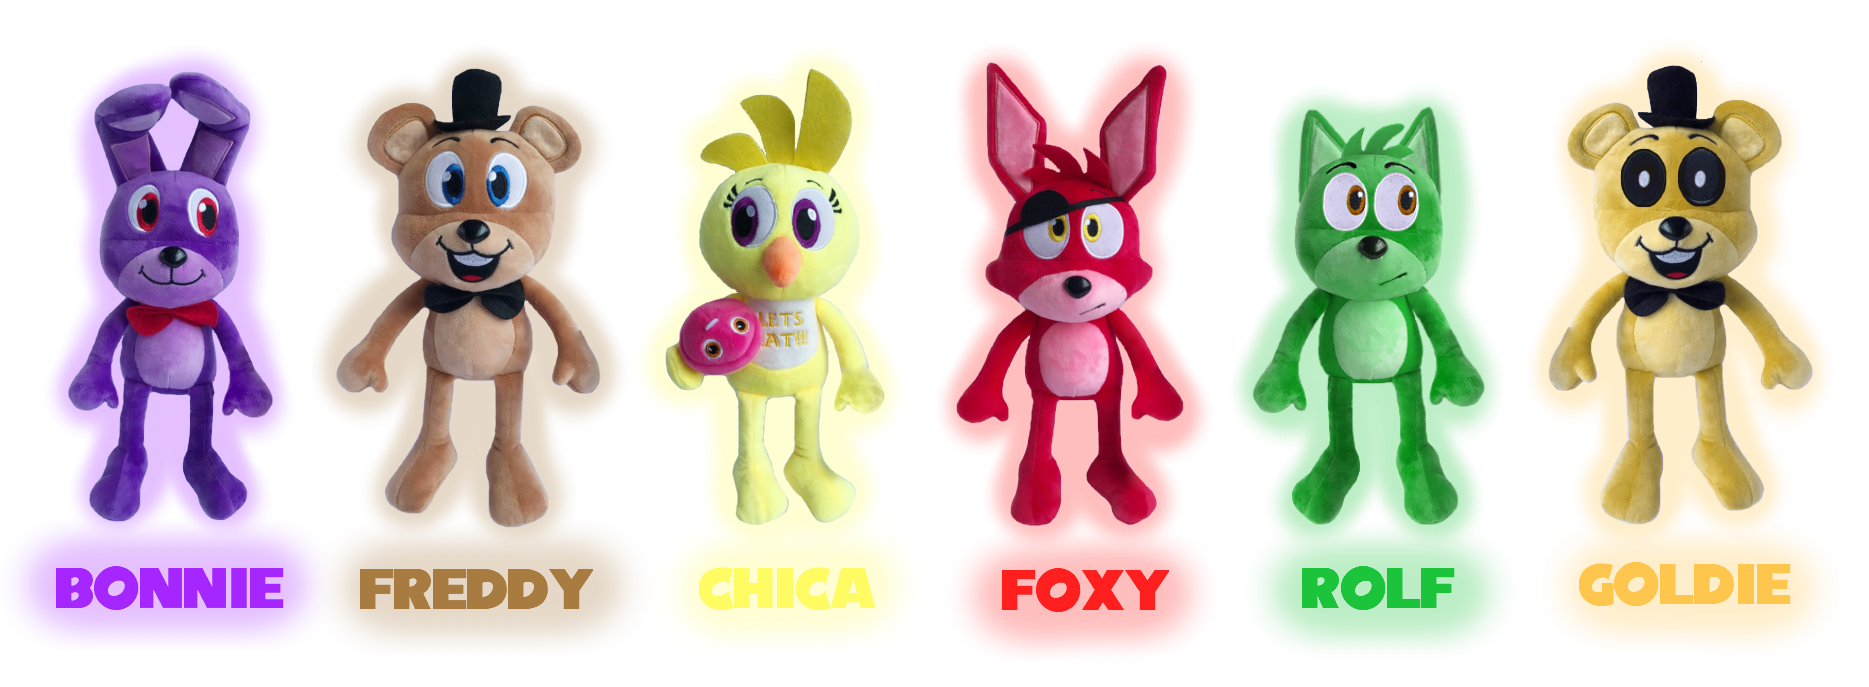 Fixed FNaF 2 Plushies part 2 by Mariorainbow6 on DeviantArt